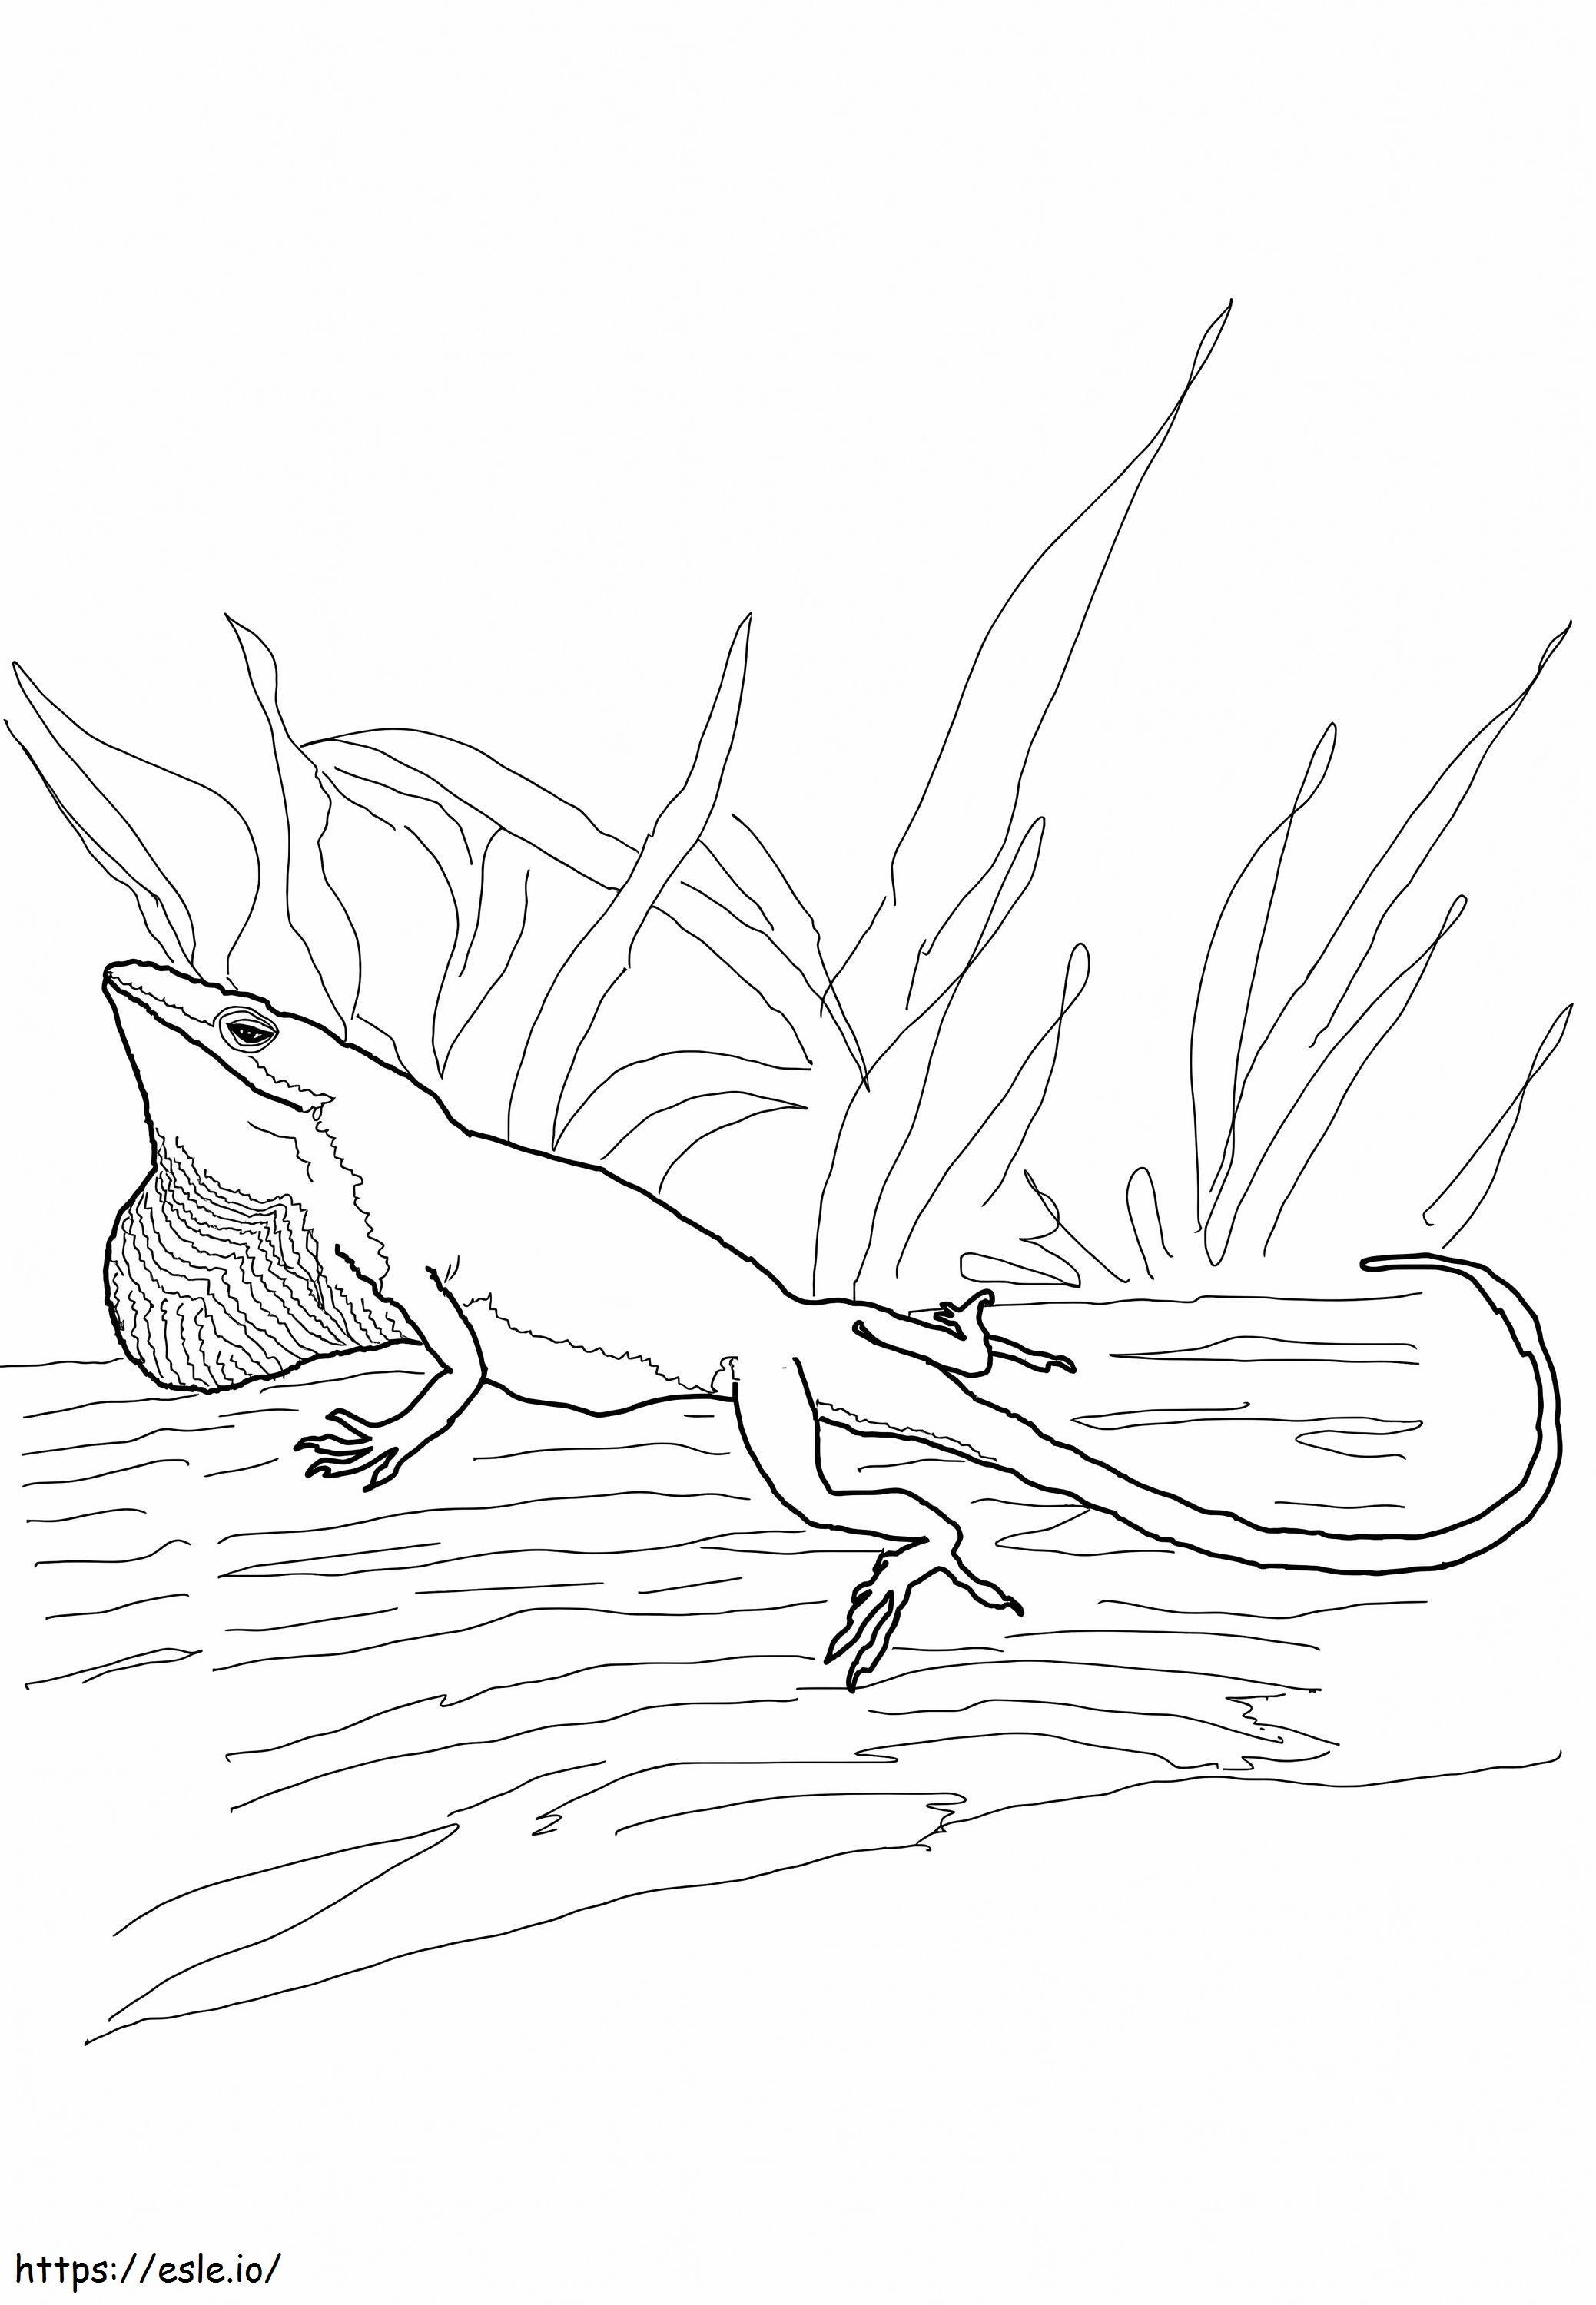 The Carolina Anole A4 coloring page